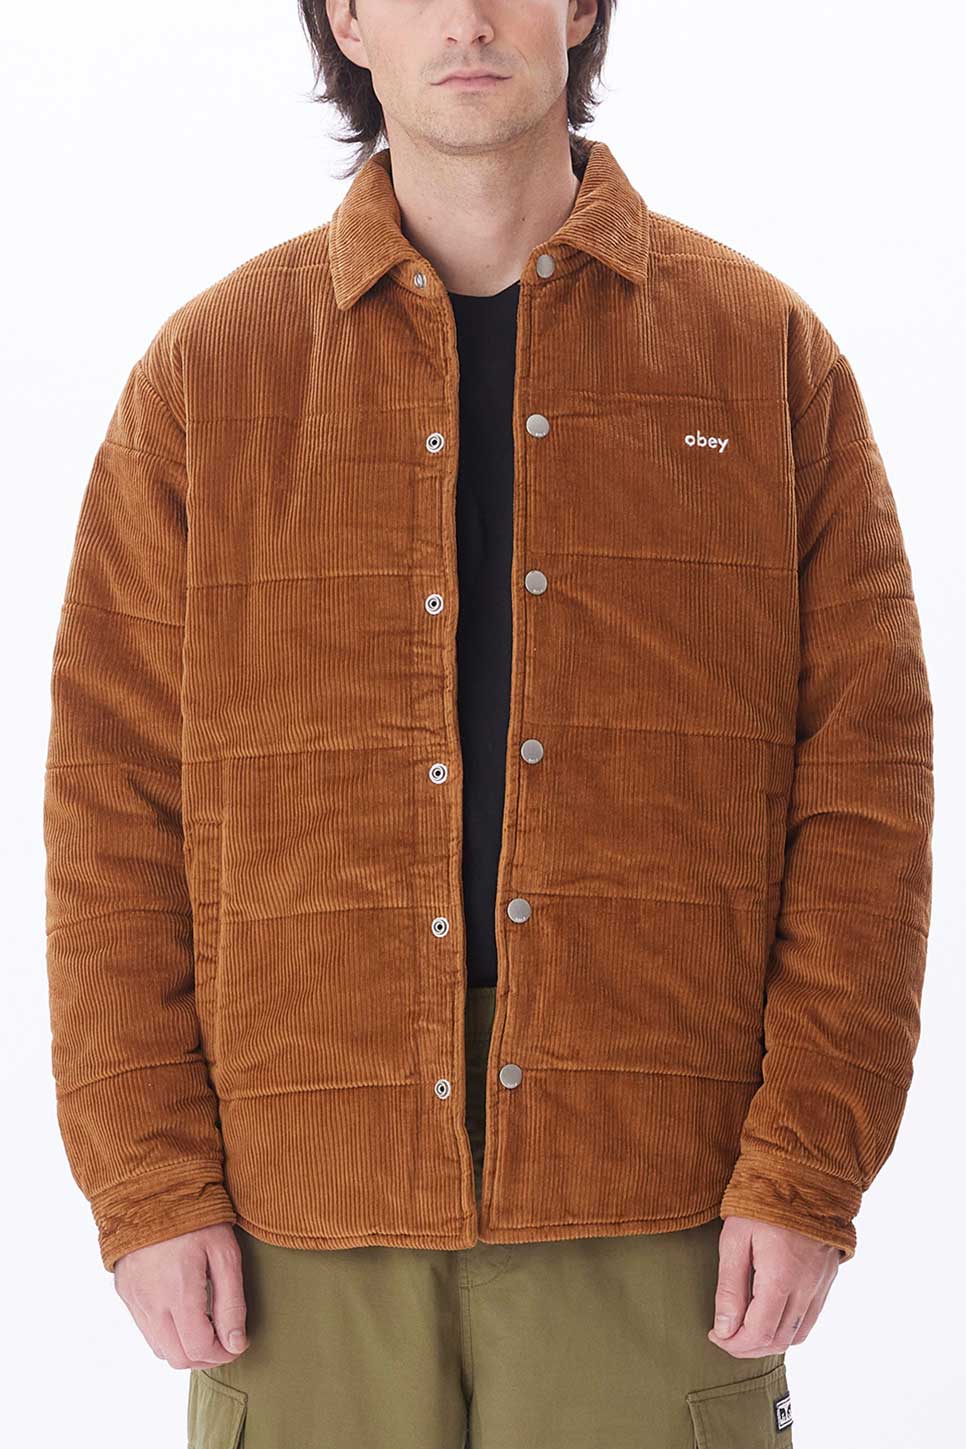 Obey - Grand Cord Shirt Jacket - Catechu Wood - Front